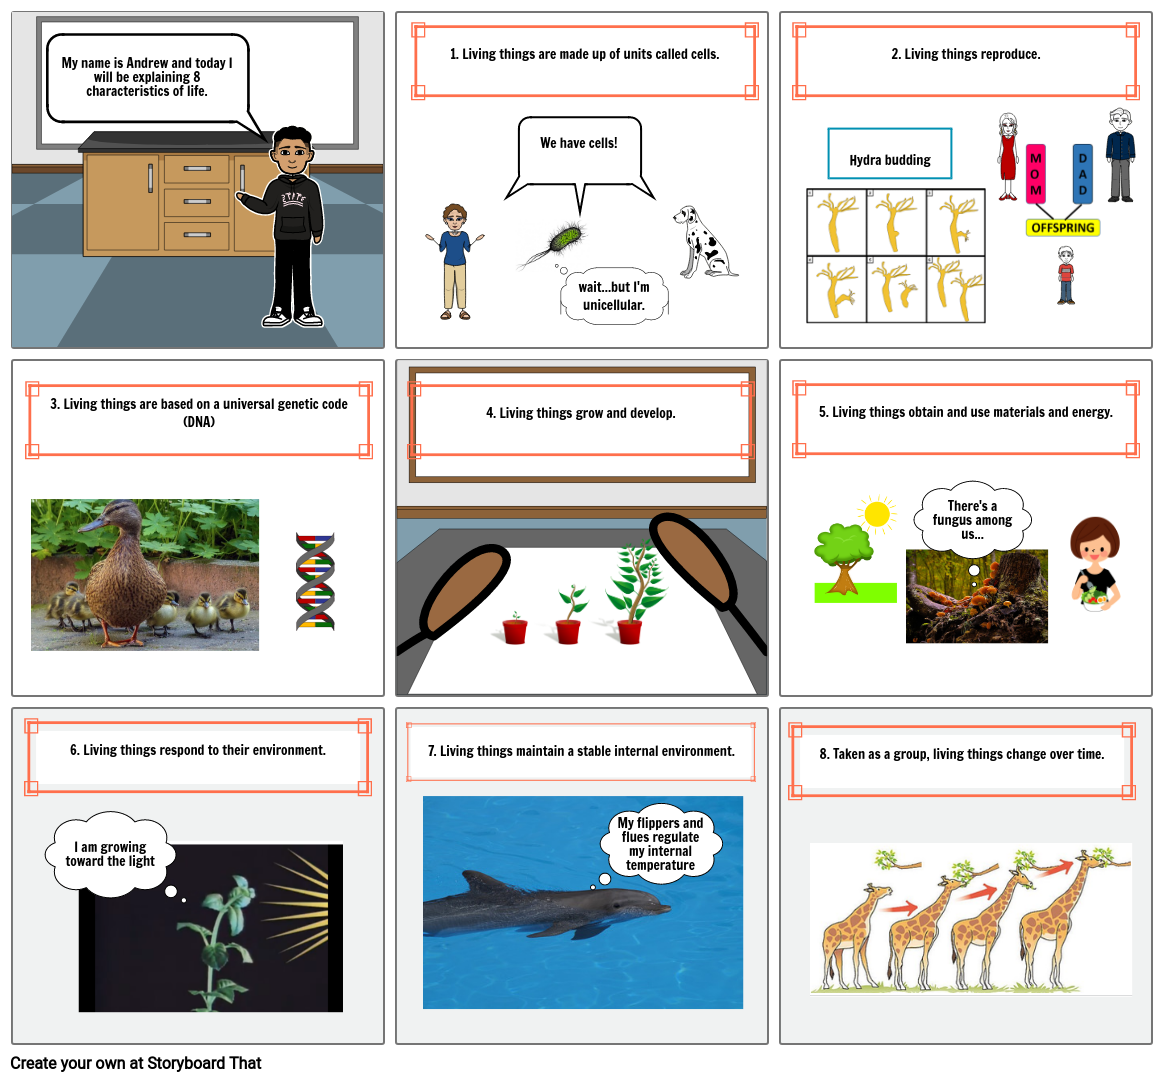 Biology 8 Characterisitcs Of Life Storyboard By Andrewdiaz